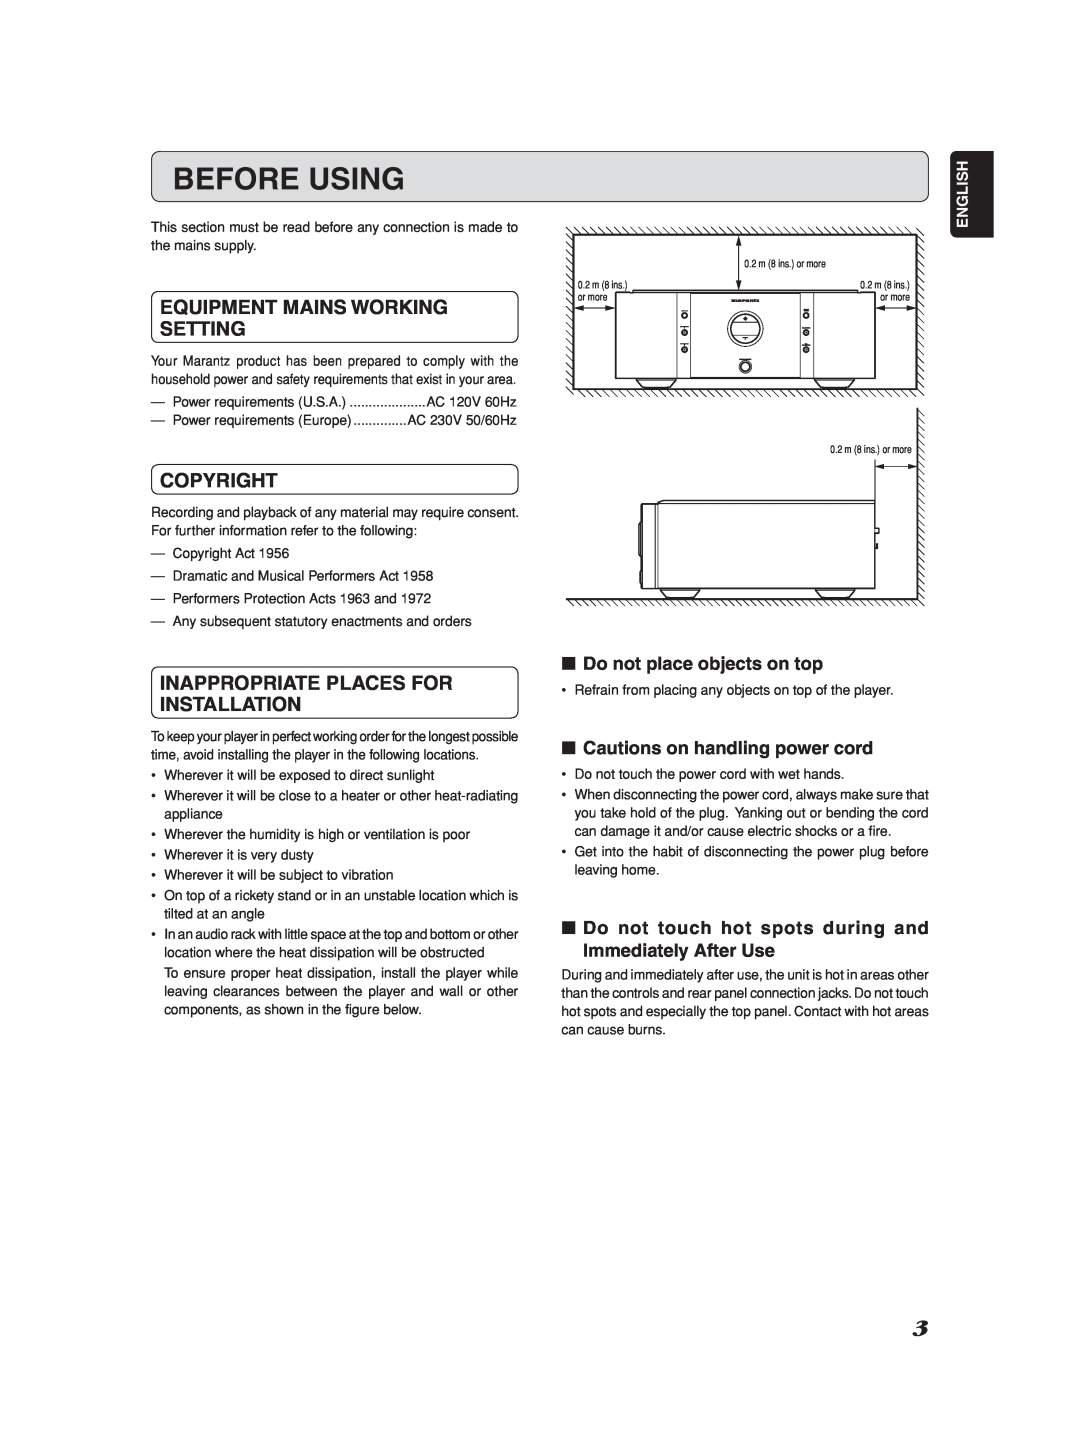 Marantz SM-1151 Before Using, Equipment Mains Working Setting, Copyright, Inappropriate Places For Installation, English 